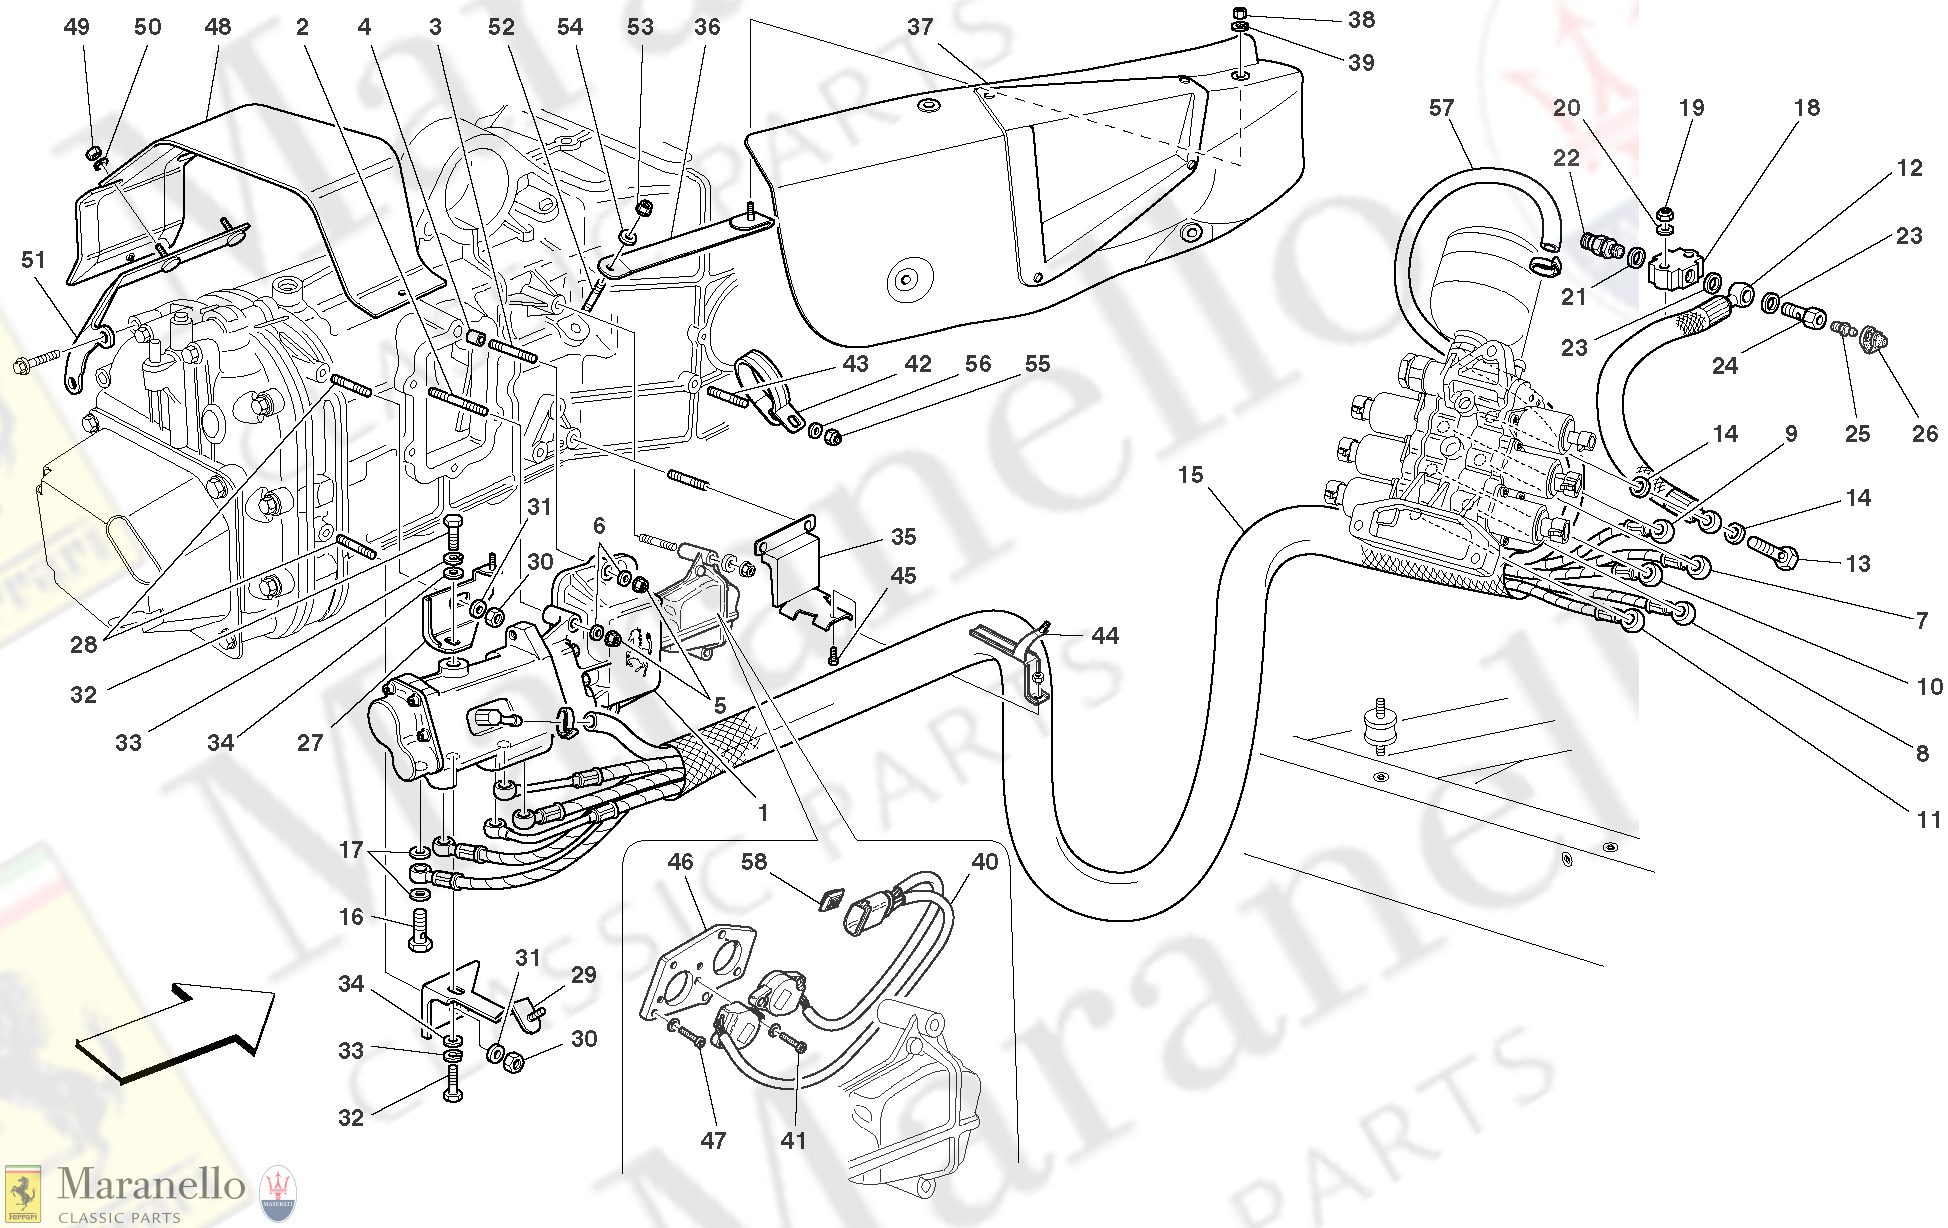 023 - Clutch And Gearbox Hydraulic Control